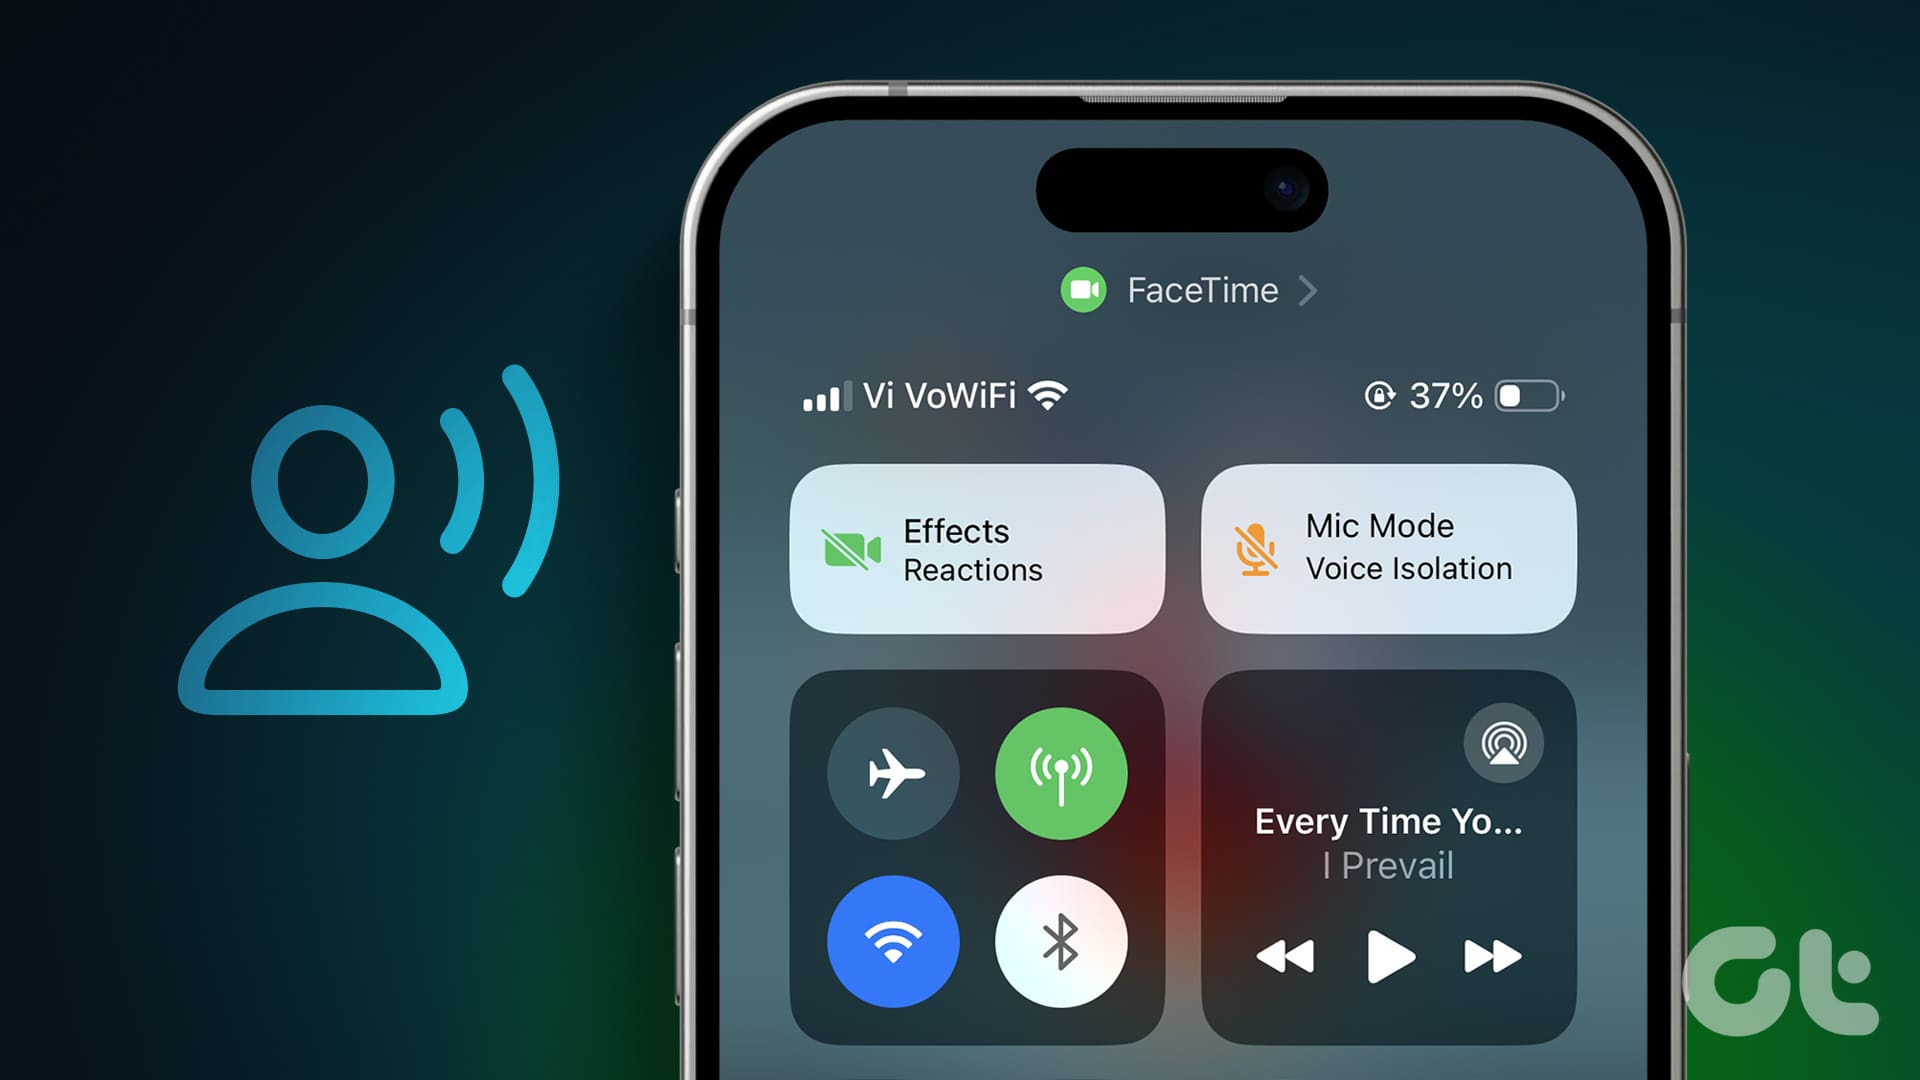 Enable and Use Voice Isolation on iPhone